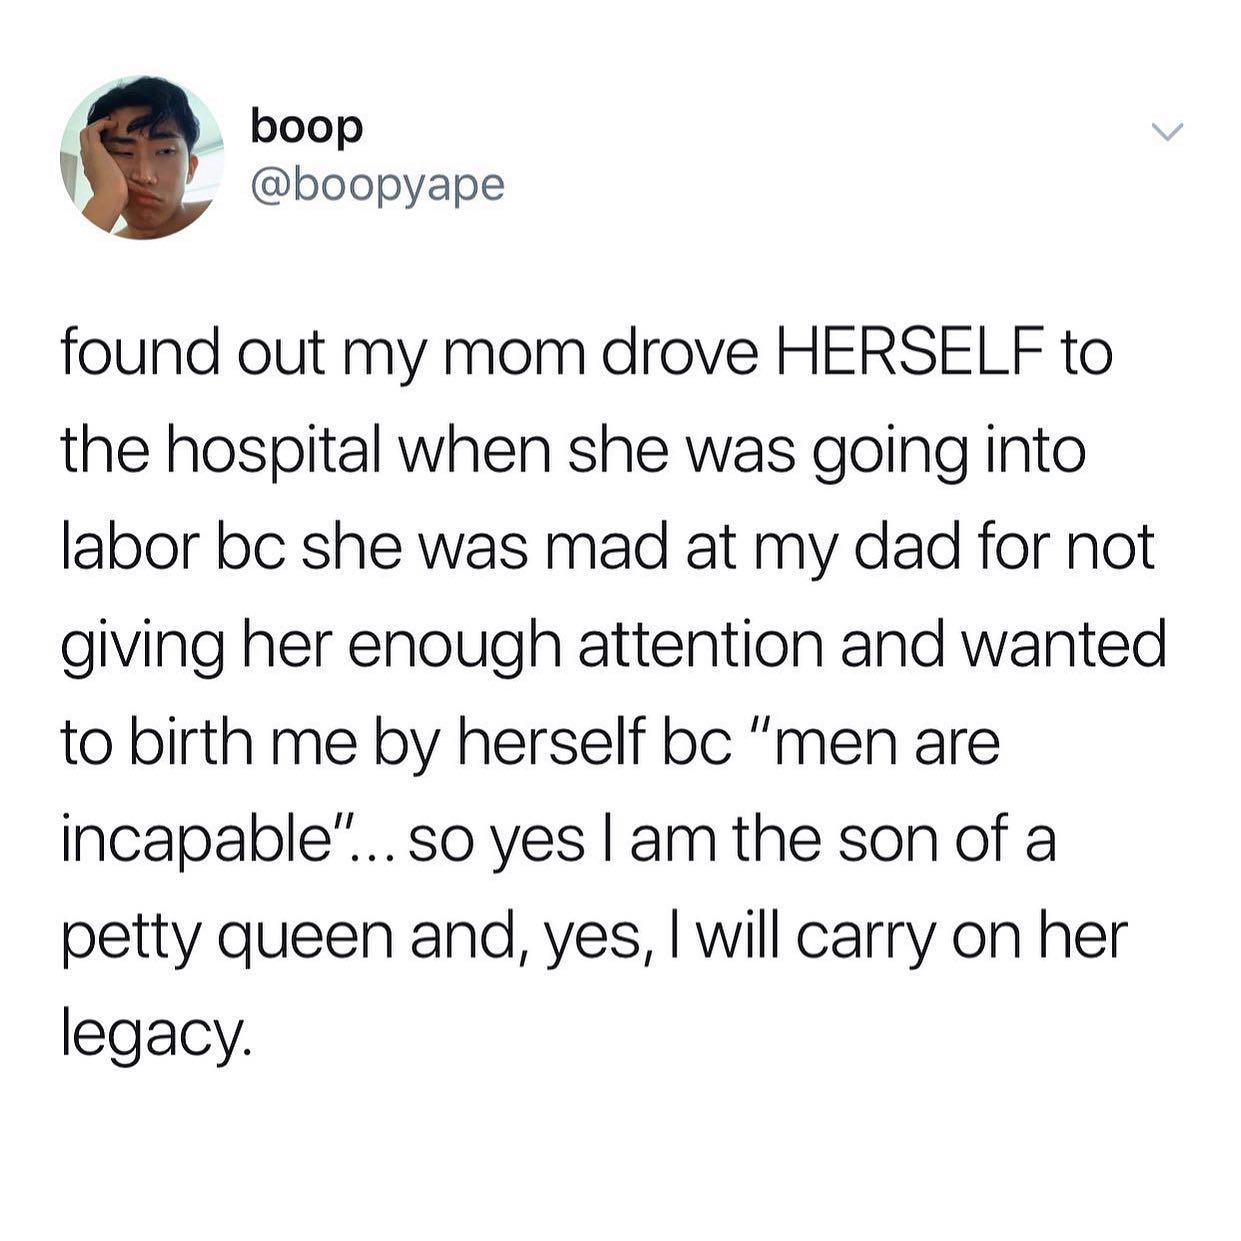 dank memes - twitter - someone who drowns in 7 feet of water is as dead as - boop found out my mom drove Herself to the hospital when she was going into labor bc she was mad at my dad for not giving her enough attention and wanted to birth me by herself b